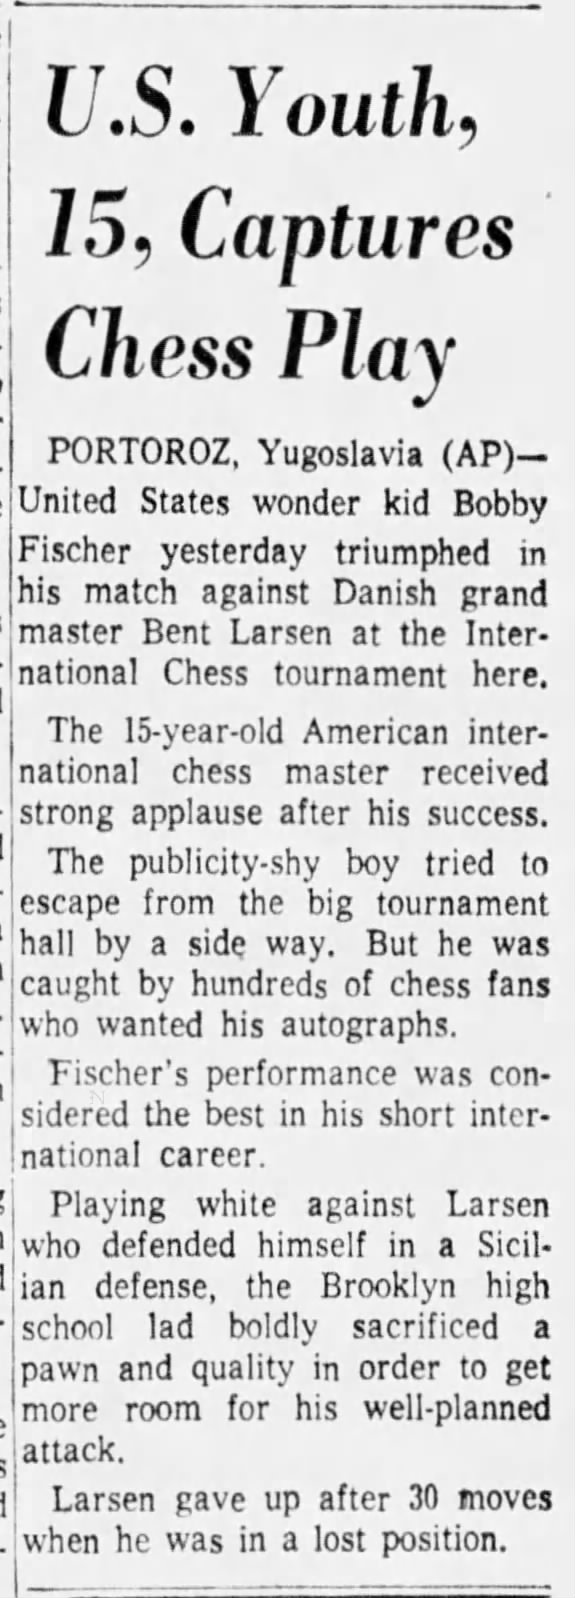 U.S. Youth, 15, Captures Chess Play